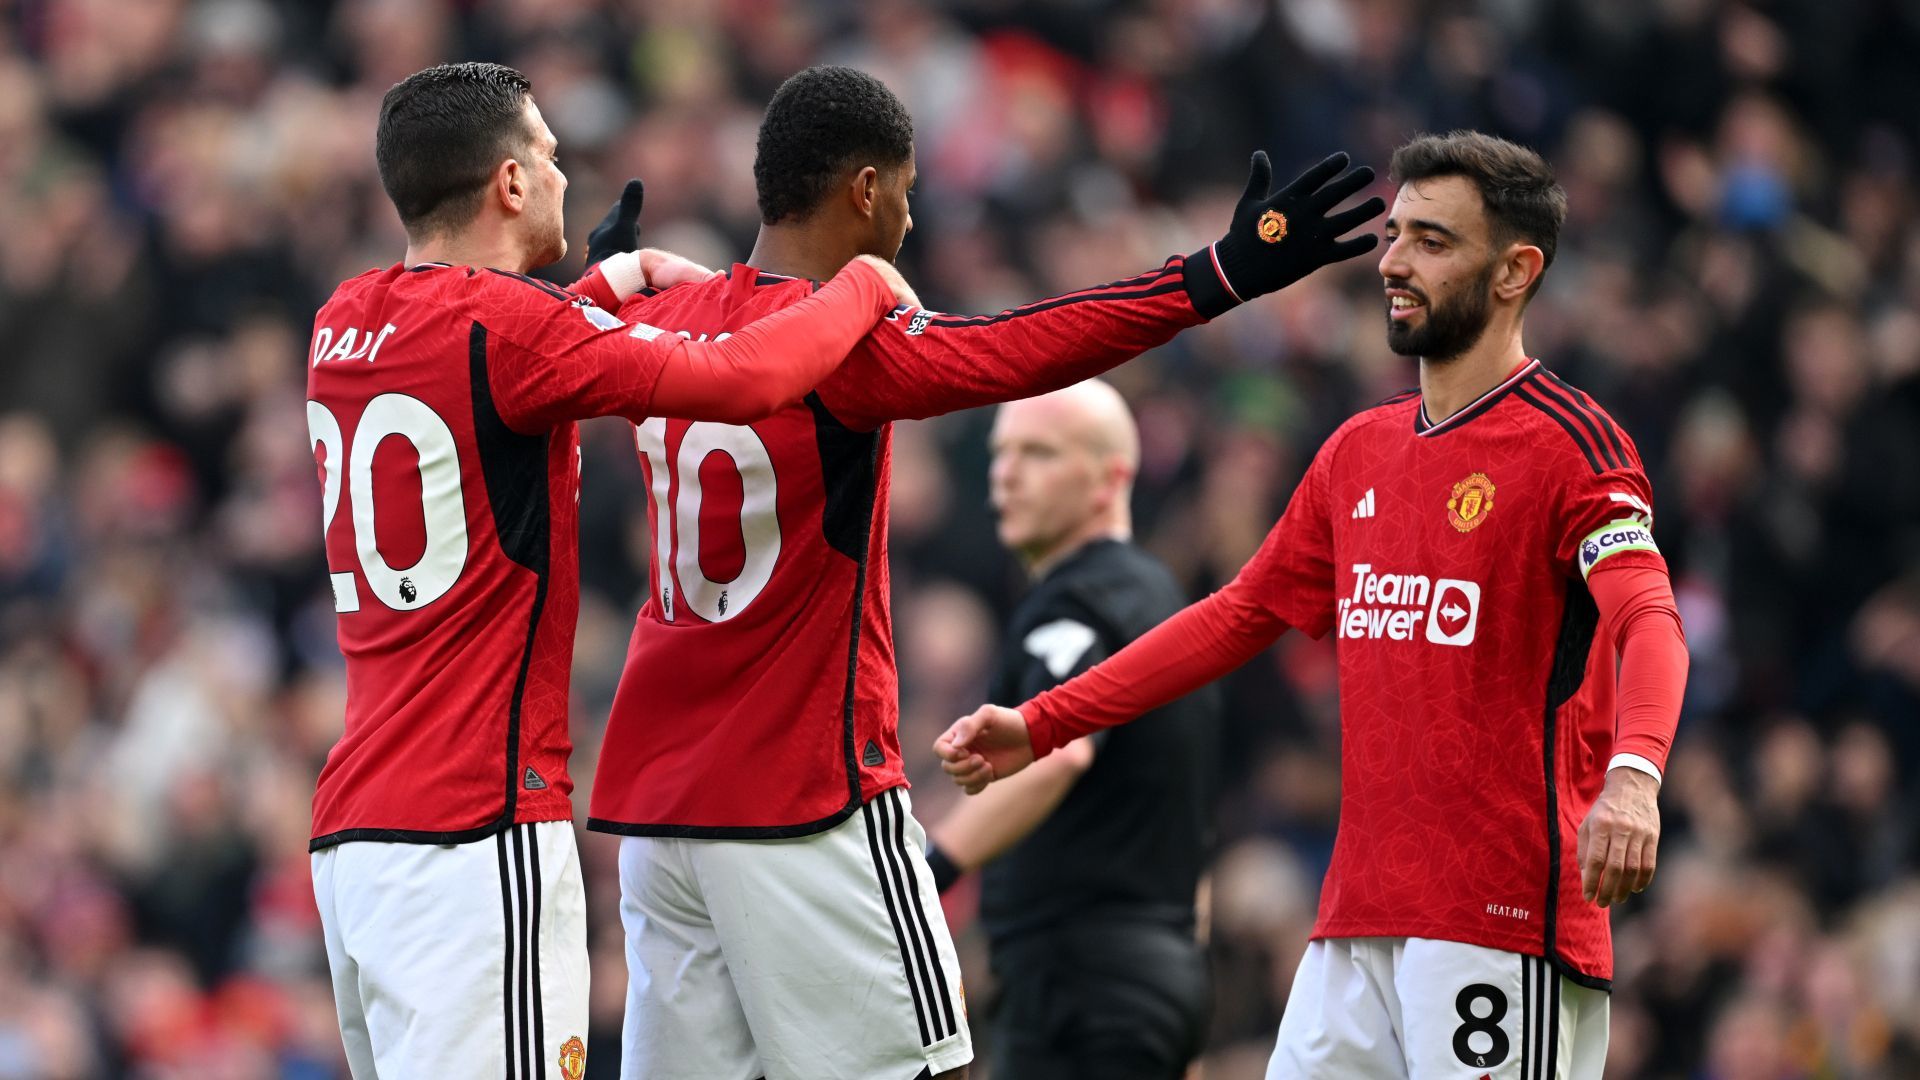 Rashford and Fernandes Score as Manchester United Reignite Their Top-Four Finish Hopes